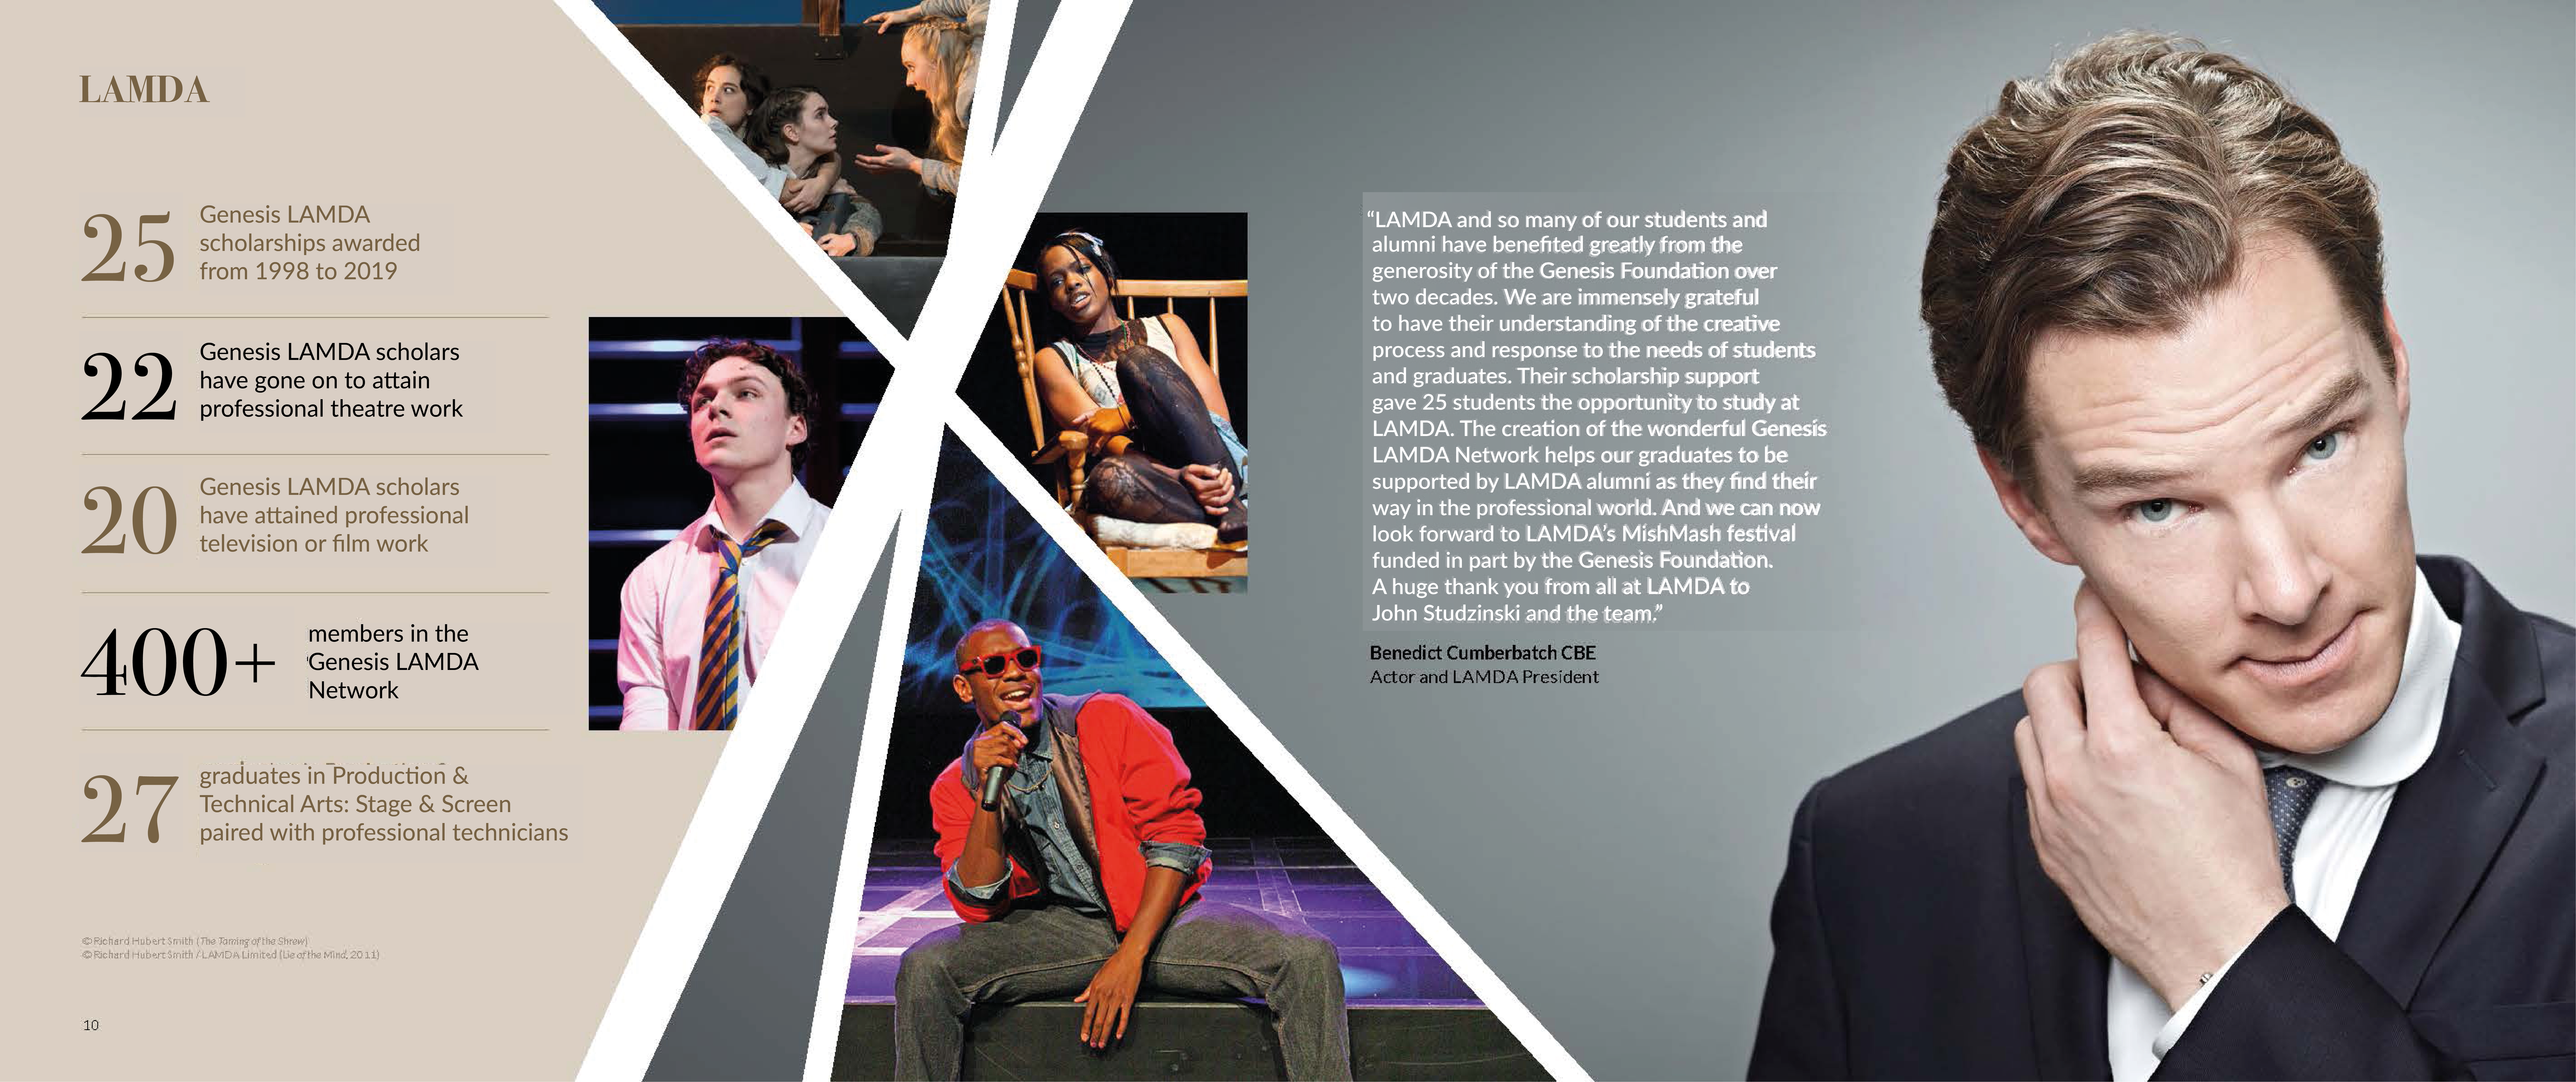 A graphic that is split into two sides. The left side has a pale beige background with the text 'LAMDA. 25 Genesis LAMDA scholarships awarded from 1998 to 2019. 22 Genesis LAMDA Scholars have gone on to attain professional theatre work. 20 Genesis LAMDA scholars have attained professional television or film work. 400 plus members in the Genesis LAMDA network. 27 graduates in Production and Technical arts: Stage and Screen paired with professional technicians.
The right side of the image has a pale grey background with an image of Benedict Cumberbatch. To the left of this image is the text 'LAMDA and so many of our students and alumni have benefited greatly from the generosity of the Genesis Foundation over two decades. We are immensely grateful to have their understanding of the creative process and response to the needs of students and graduates. Their scholarship support gave 25 students the opportunity to study at LAMDA. The creation of the wonderful Genesis LAMDA Network helps our graduates to be supported by LAMDA alumni as they find their way in the professional world. And we can now look forward to LAMDA's MishMash festival funded in part by the Genesis Foundation. A hue thank you from all at LAMDA to John Studzinski and the team'. This is a quote from Benedict Cumberbatch CBE who is and actor and the LAMDA President. 